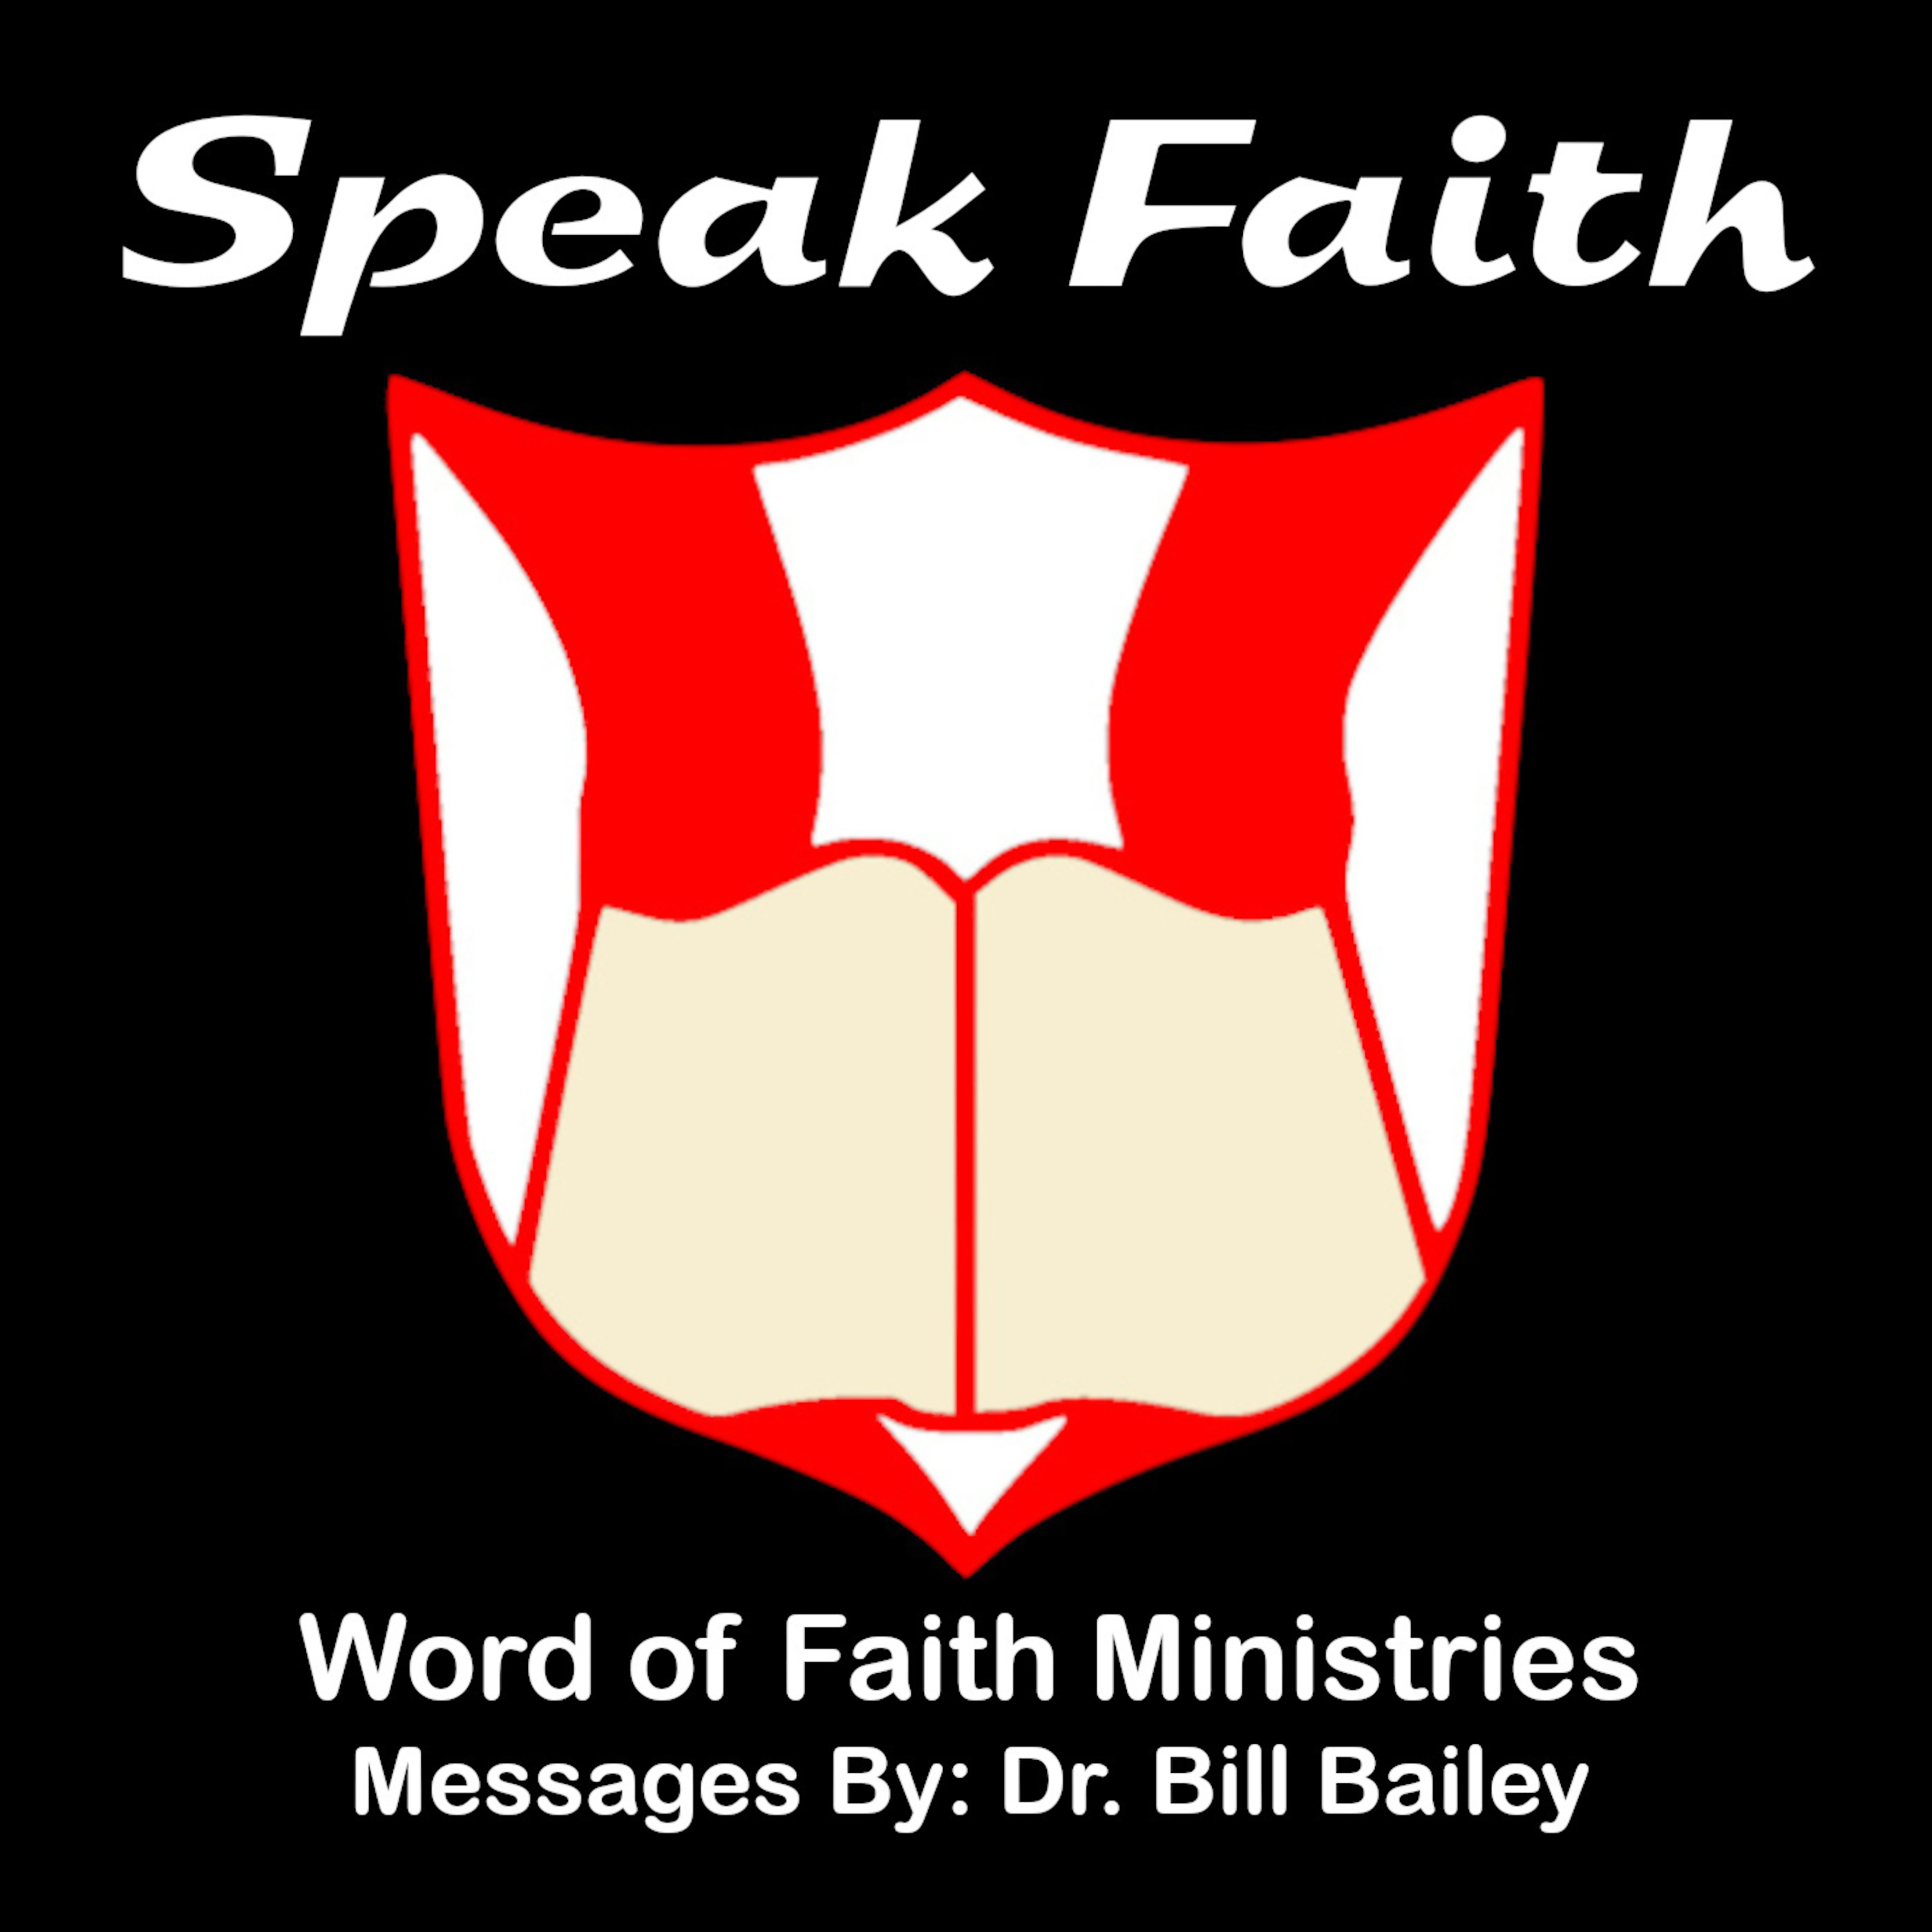 Word of Faith Ministries - The Bible Teaching Ministry of Dr. Bill Bailey